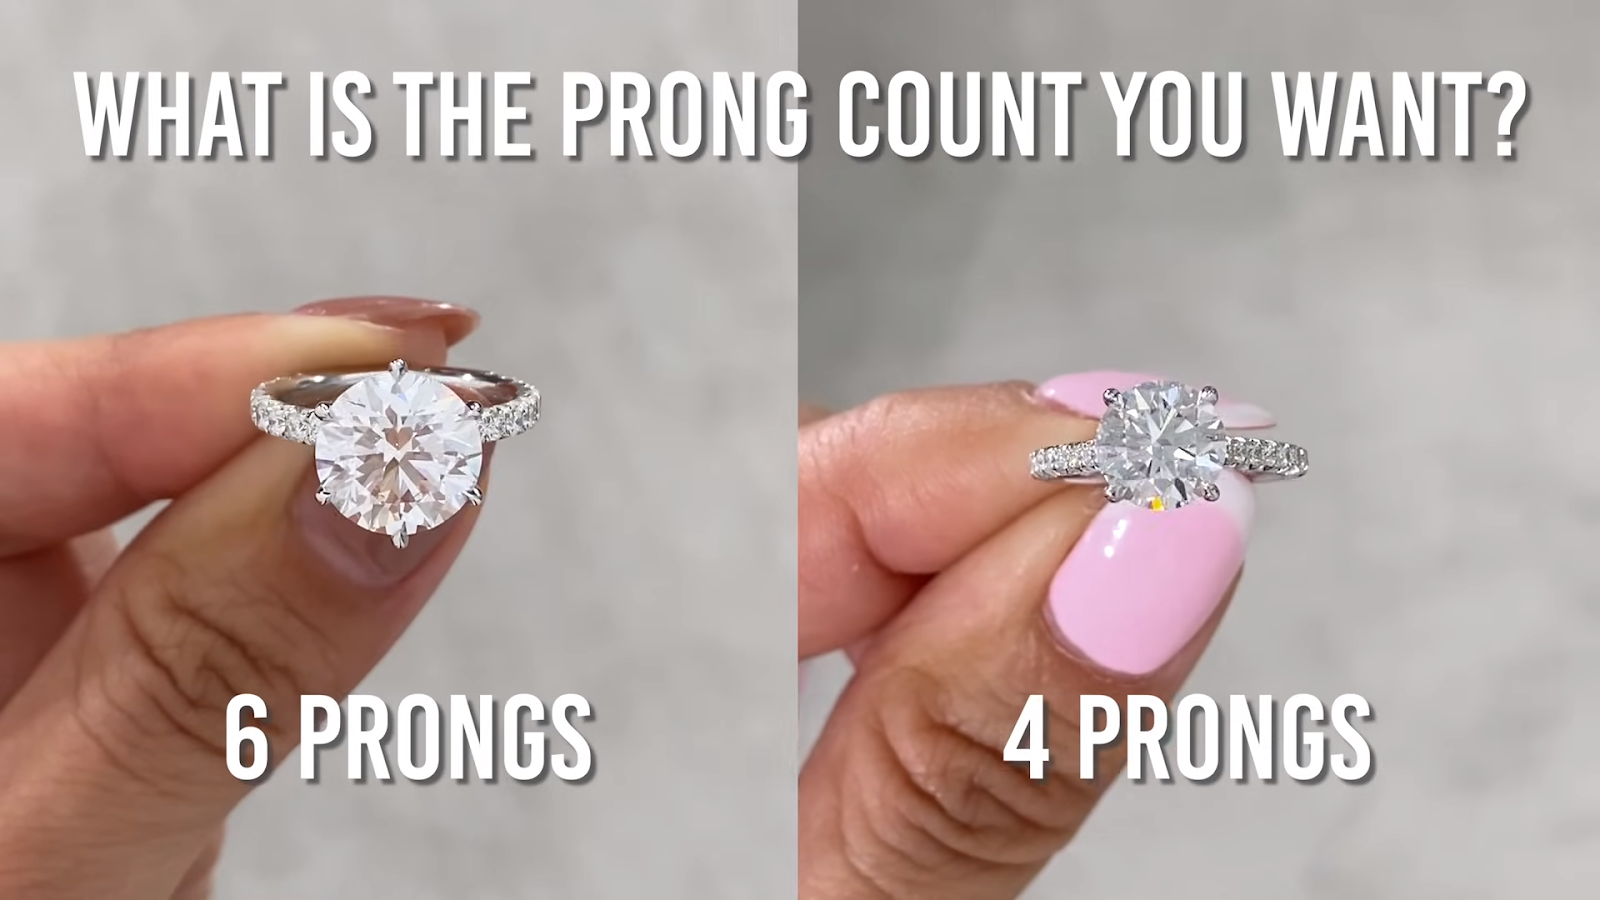 How many prongs are you envisioning